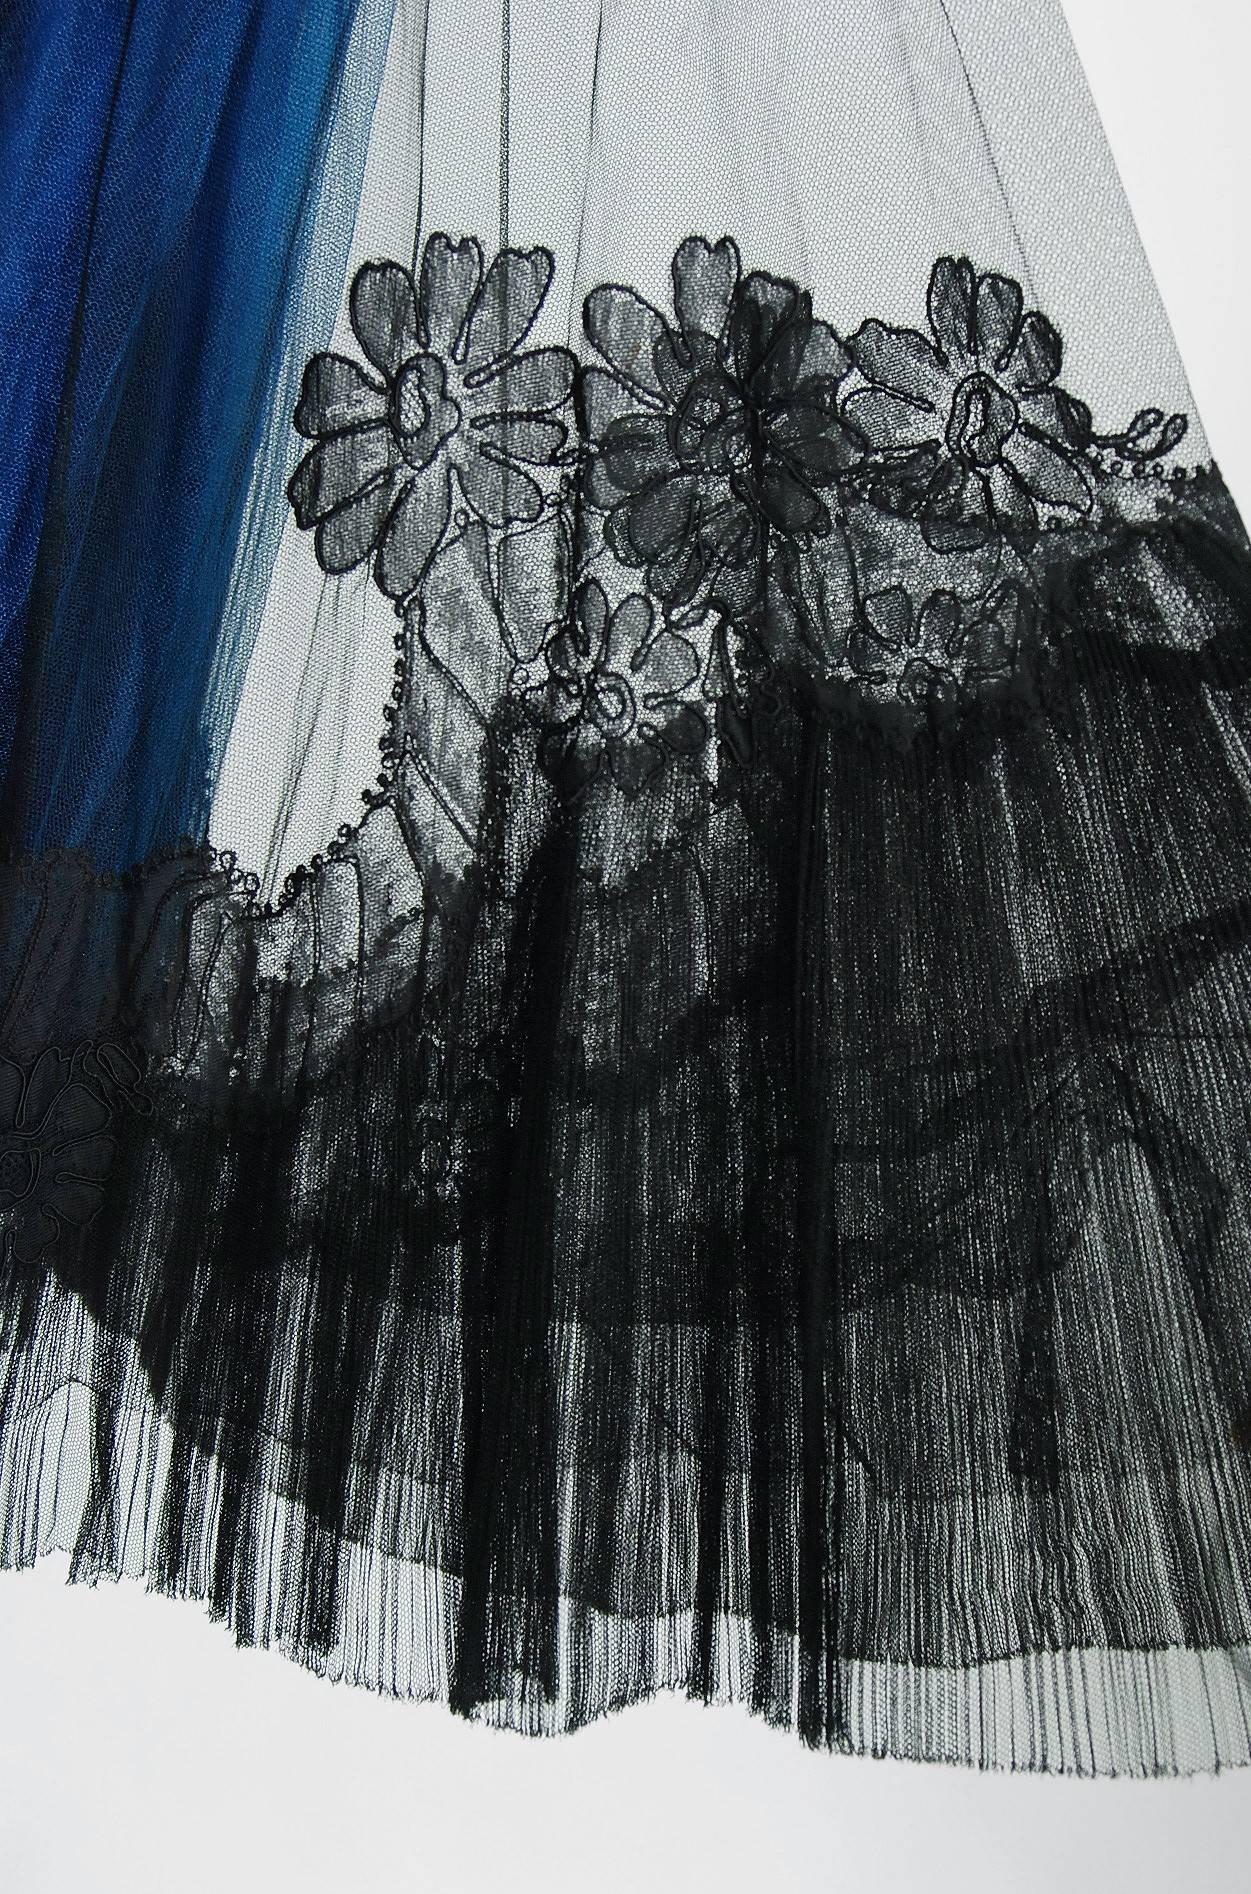 Women's 1955 Digby Morton Couture Black & Blue Floral Lace Illusion Pleated Party Dress